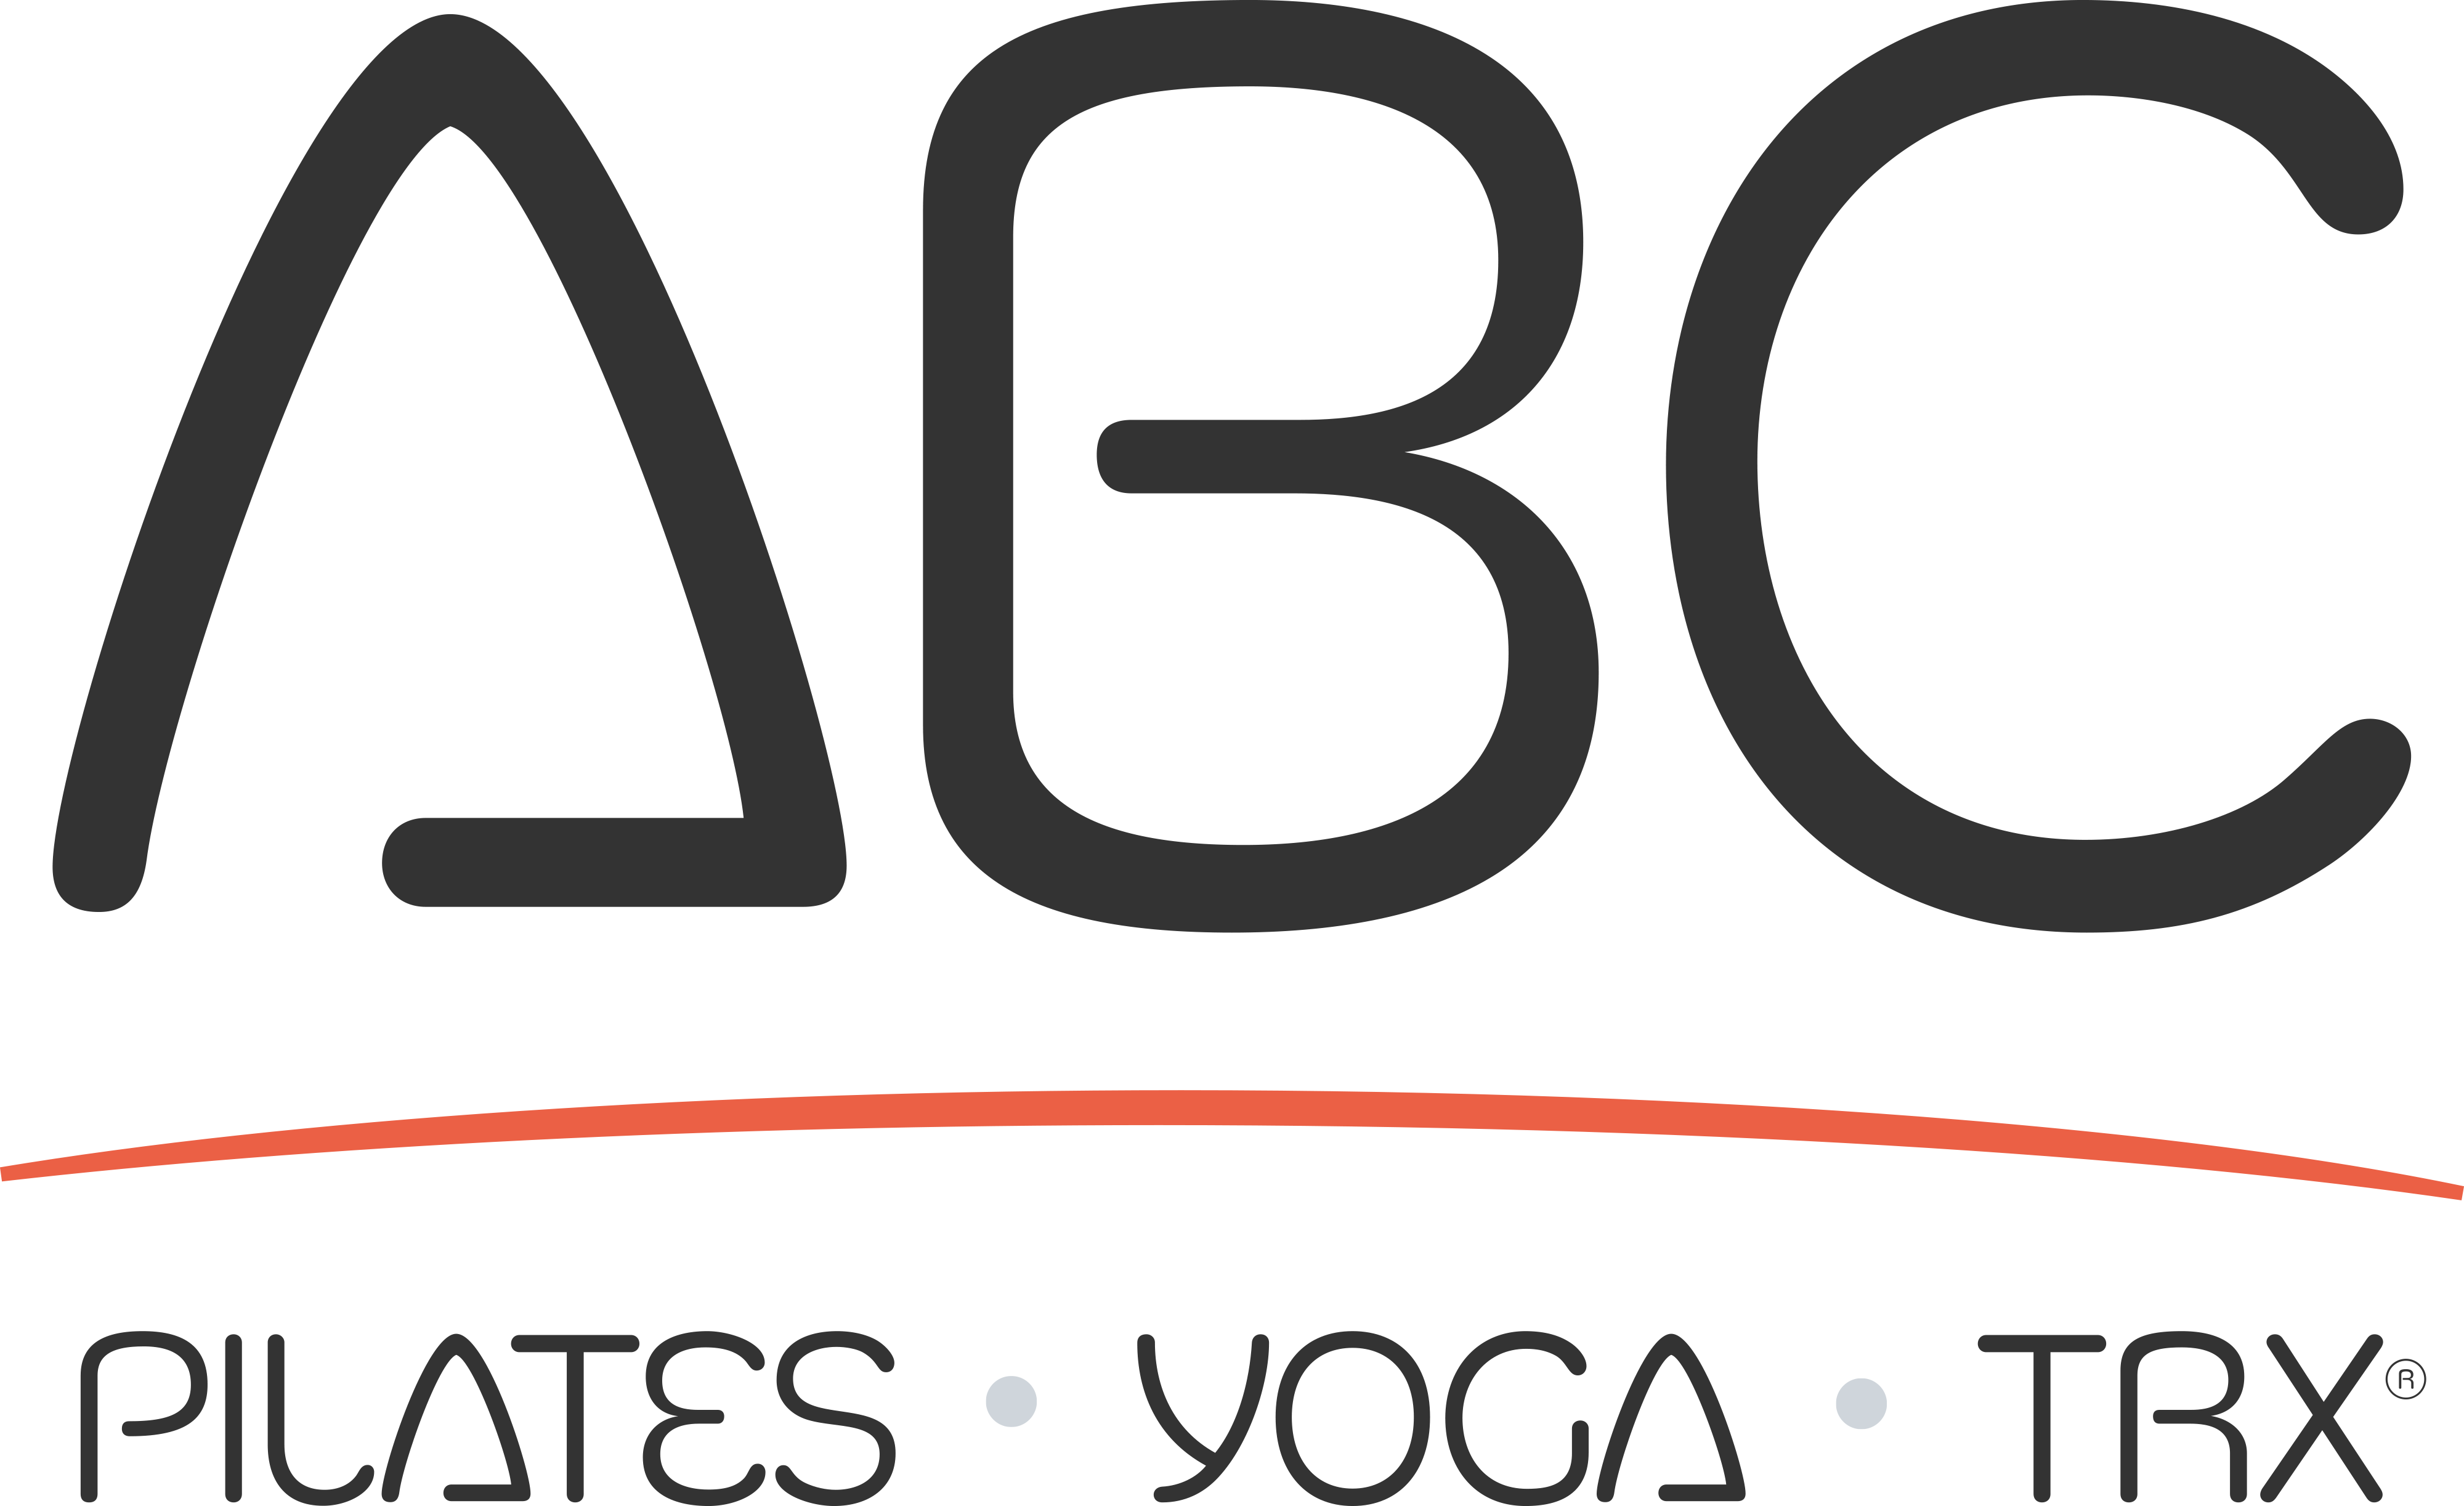 I Tried Pilates For 8 Weeks And This Is What Happened. - ABC Fitness Studio